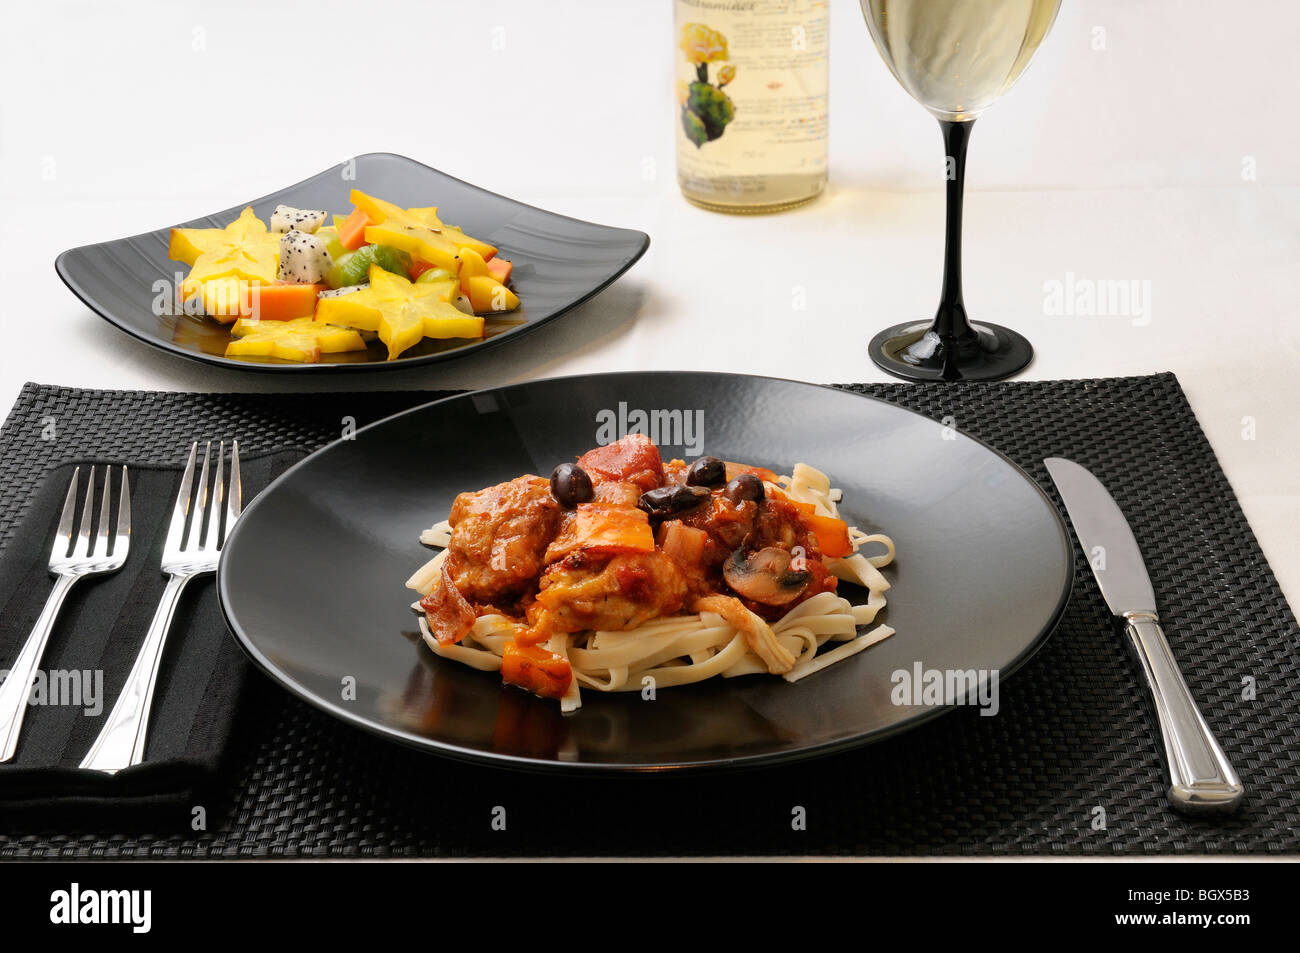 Table setting with plate of Chicken Marengo with fruit salad and white wine Stock Photo